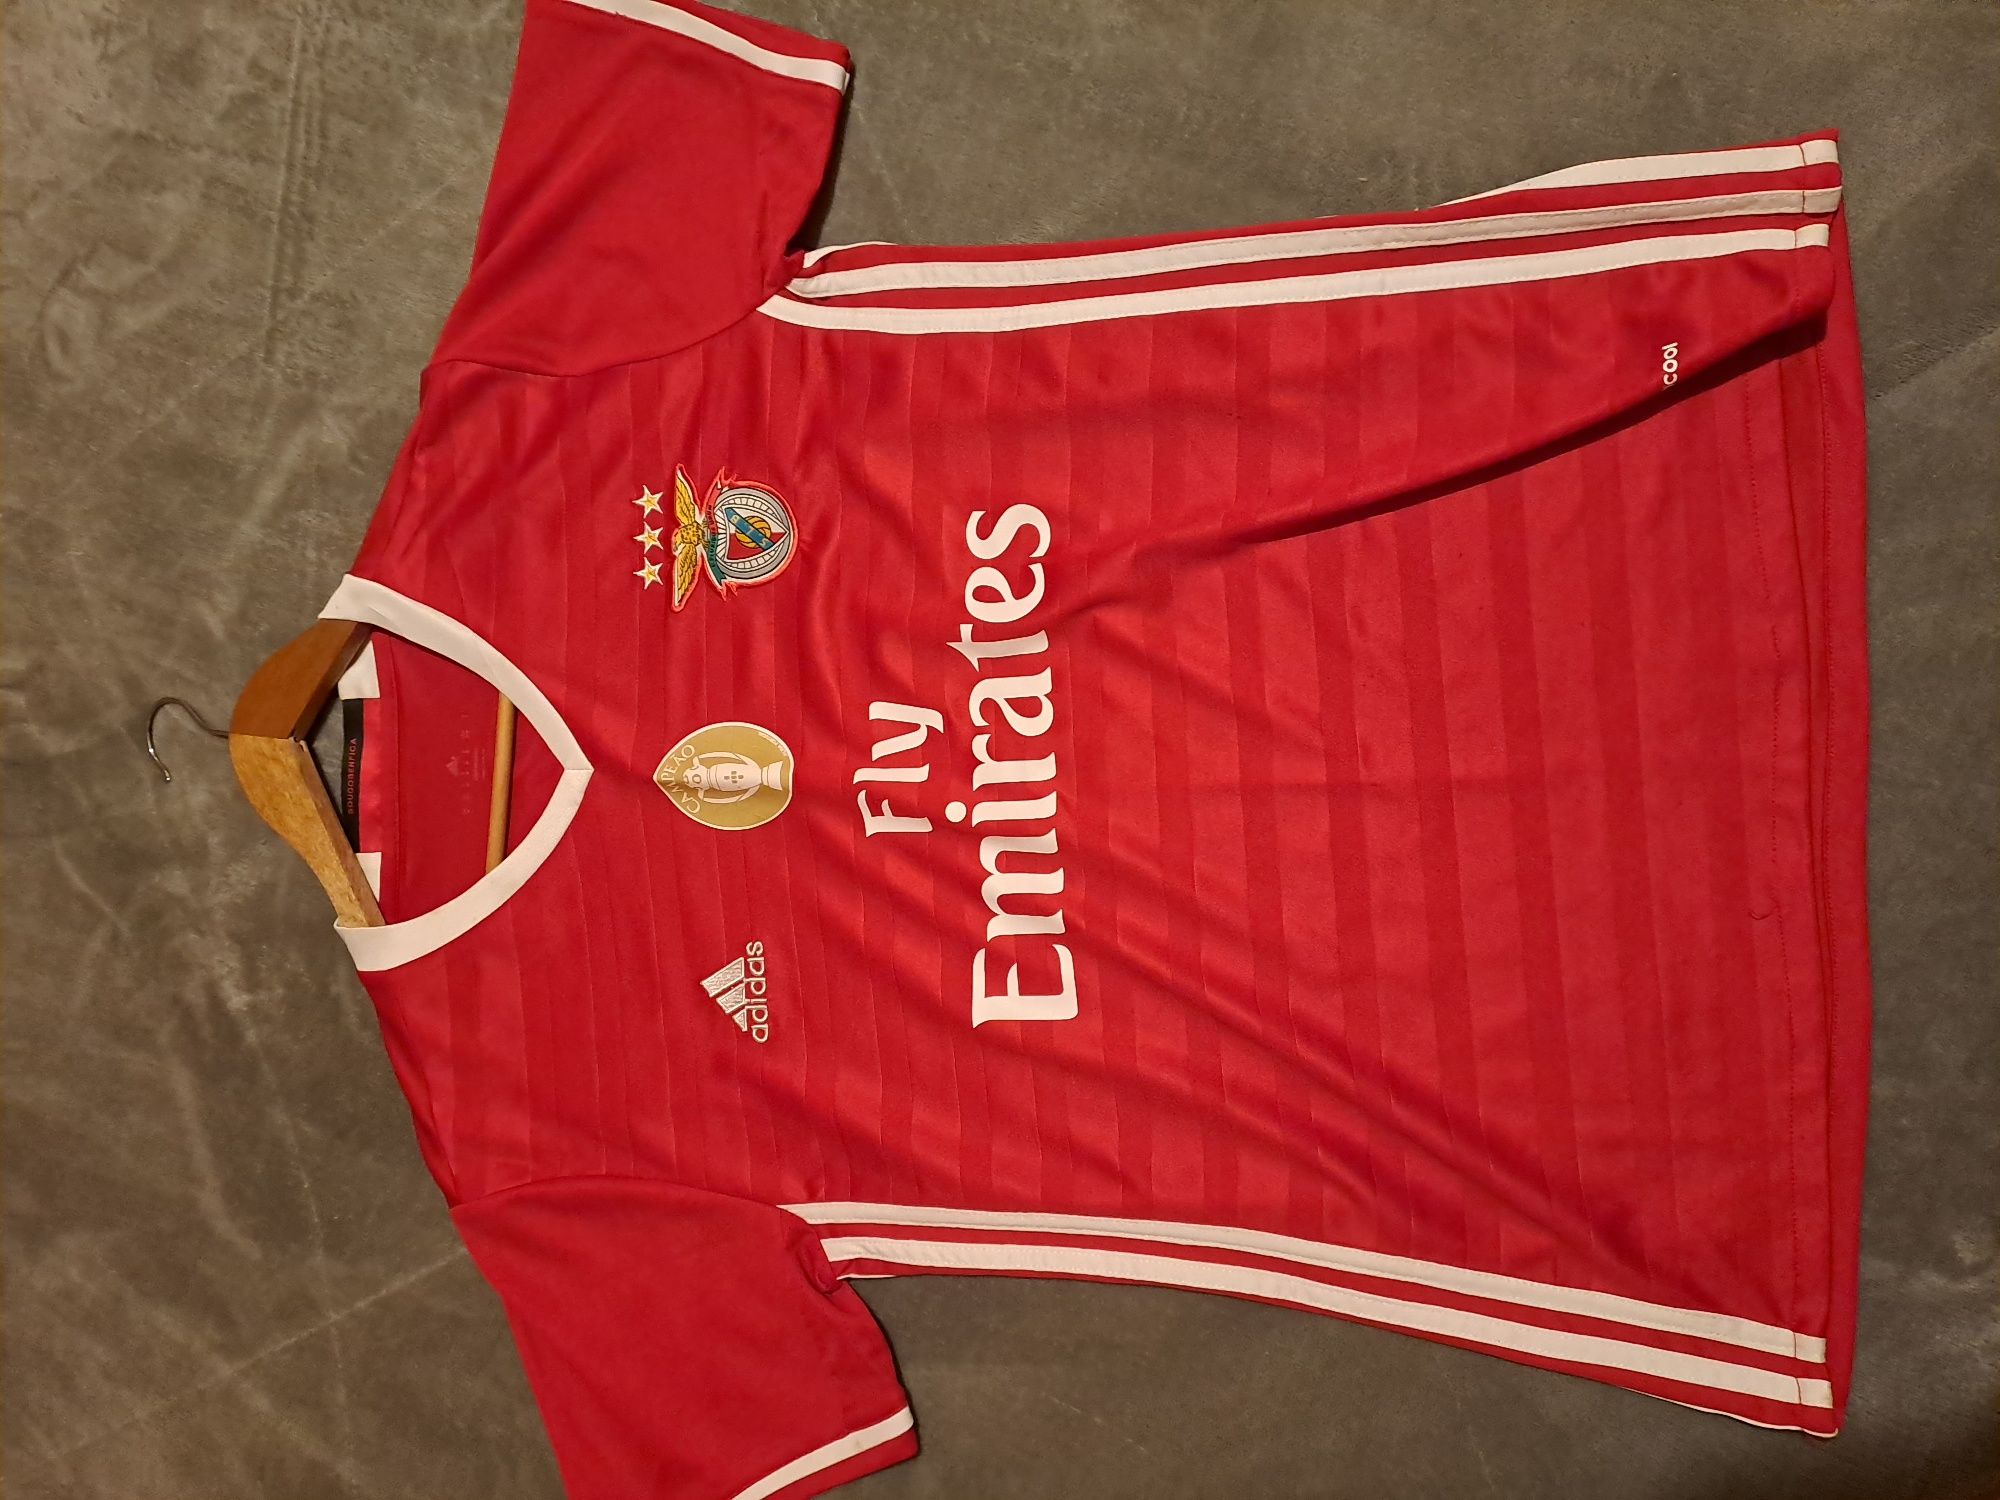 Camisola S.L Benfica 15/16